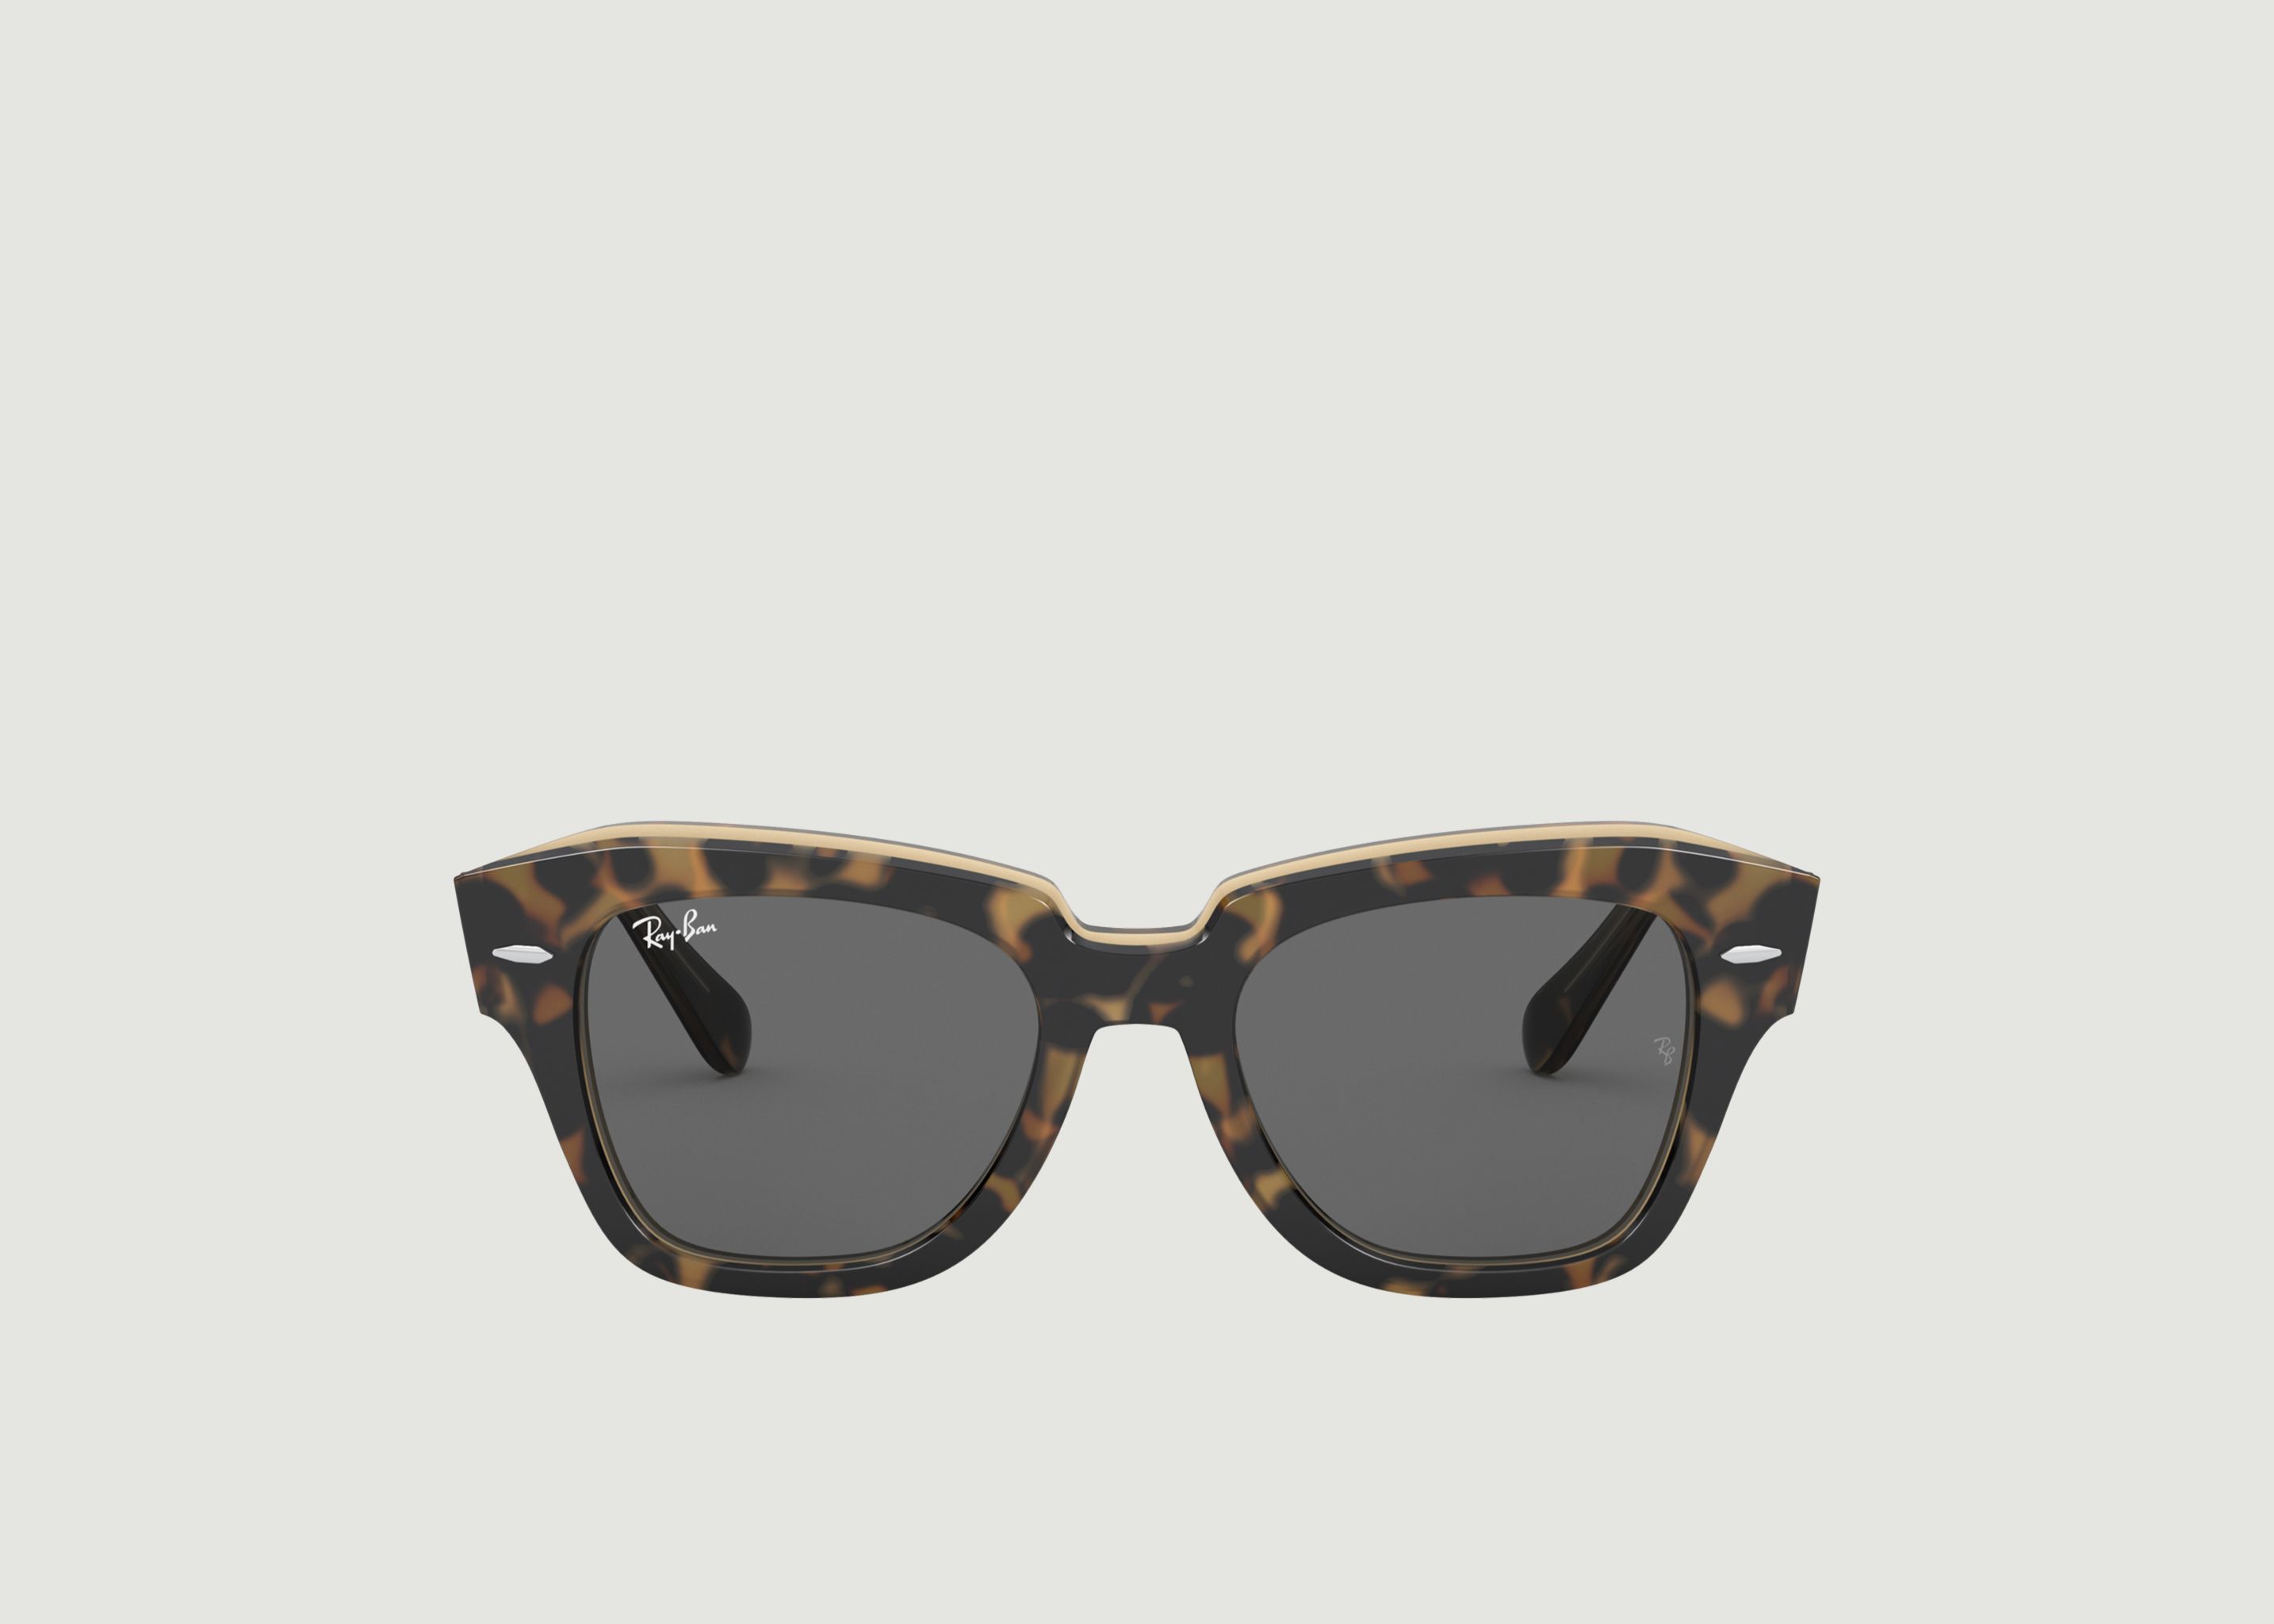 Lunettes de soleil State Street - Ray-Ban